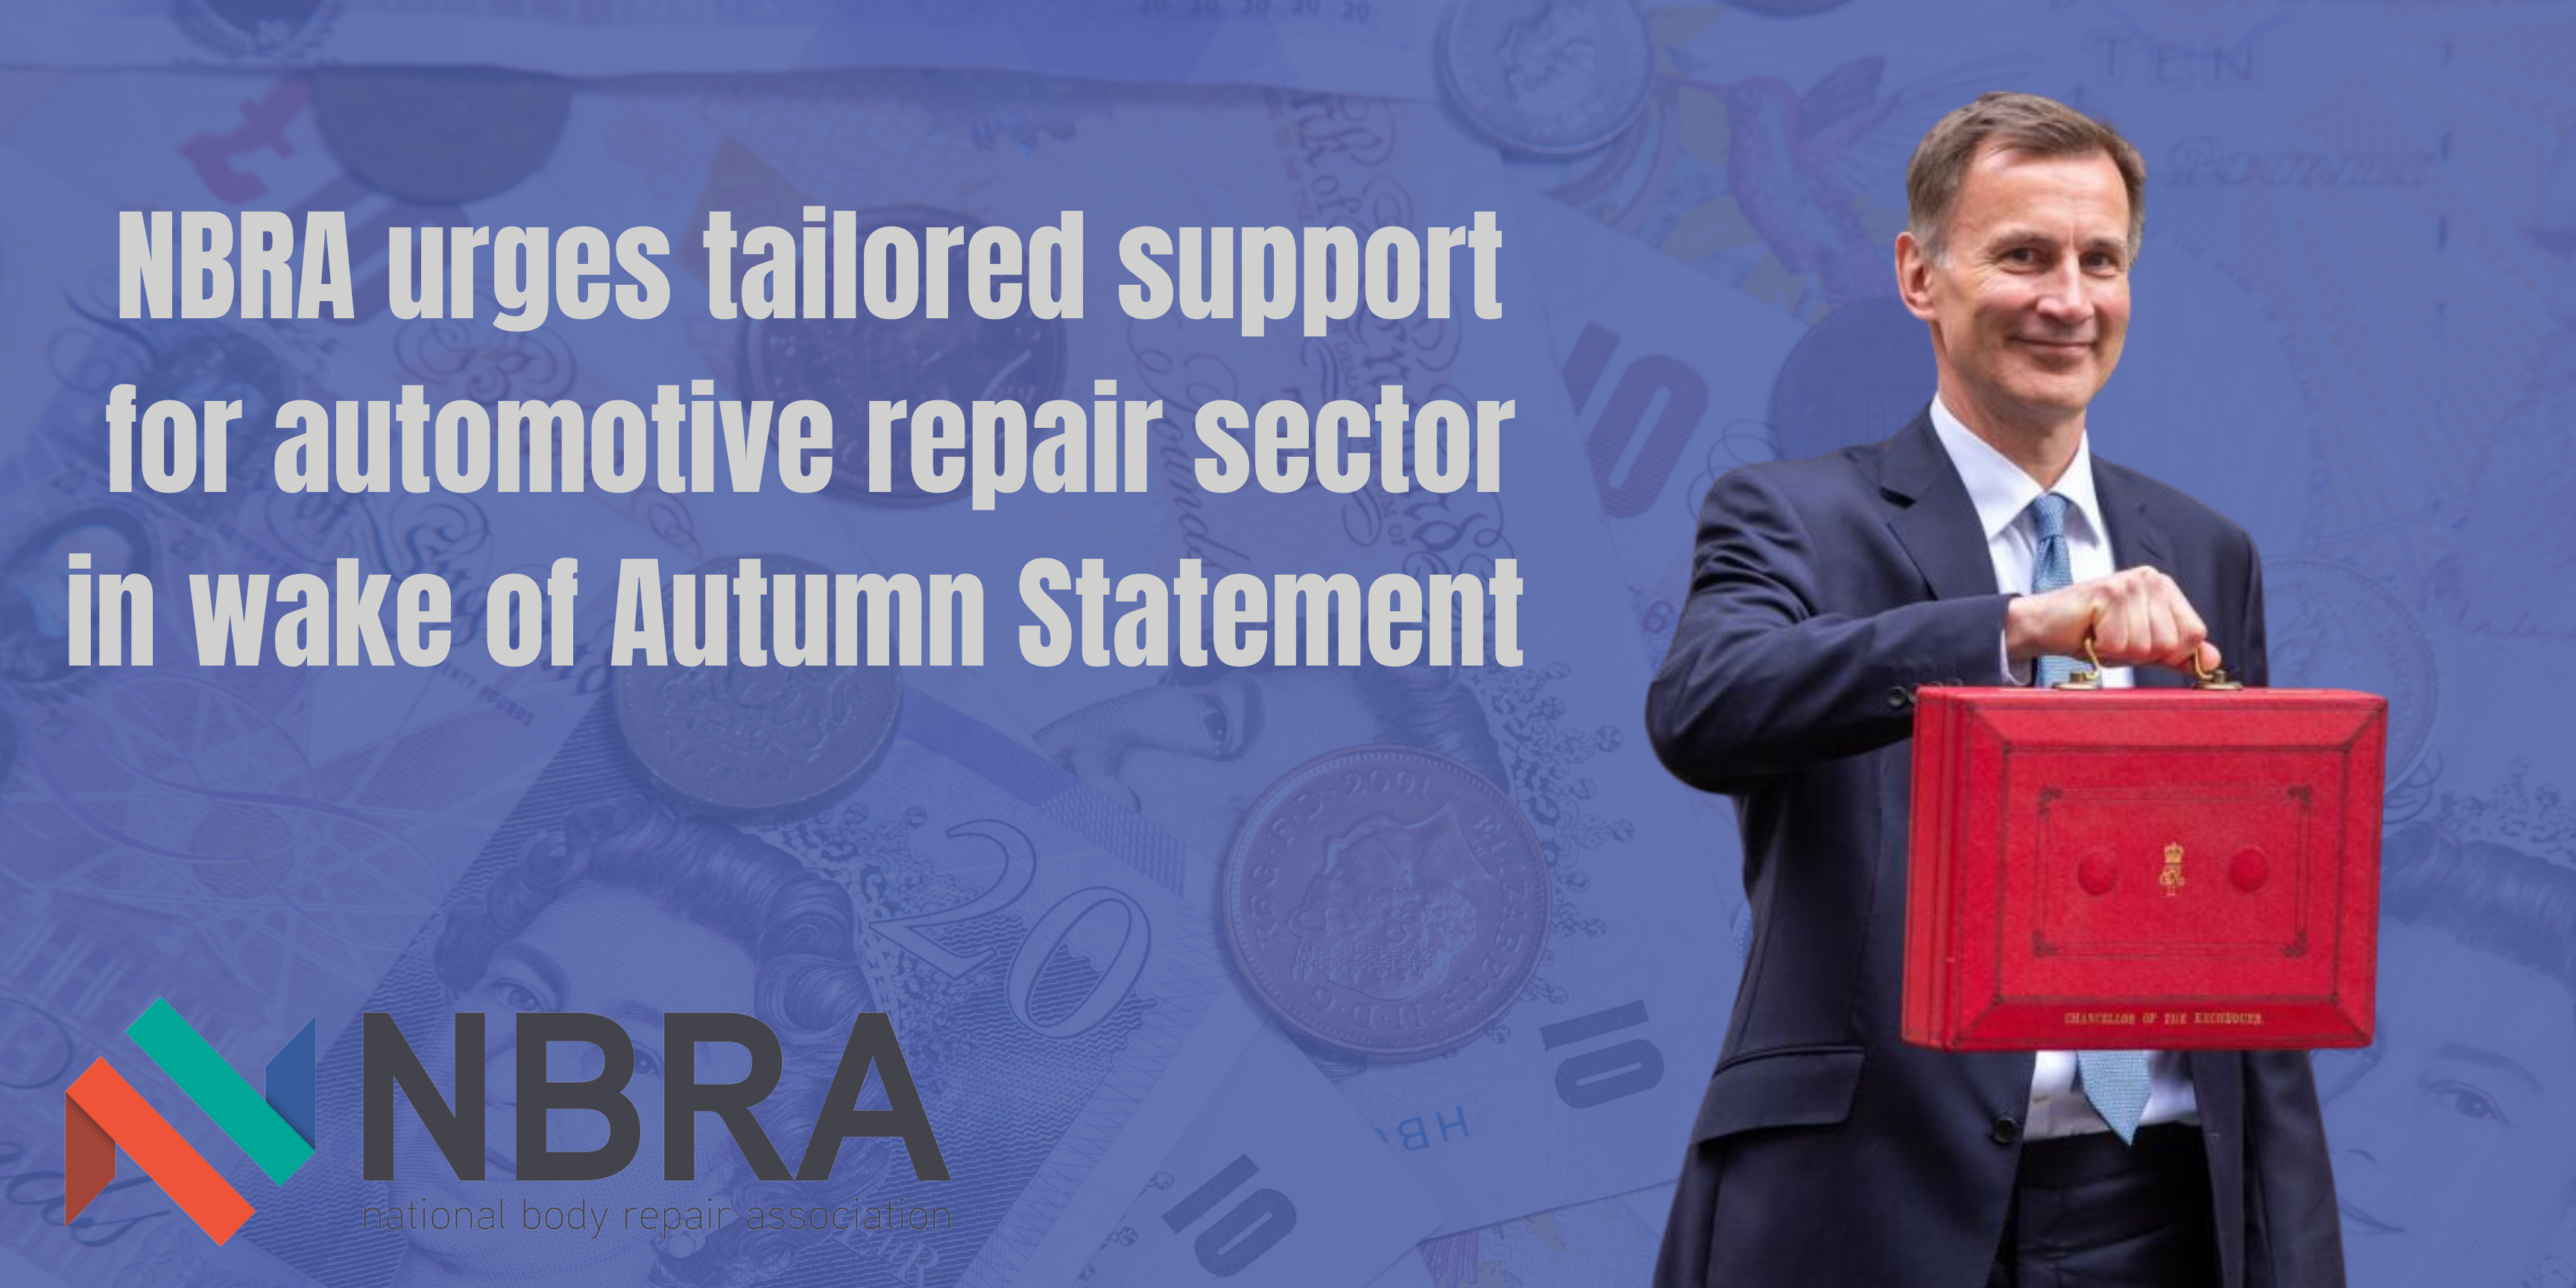 NBRA urges tailored support for automotive repair sector in wake of Autumn Statement